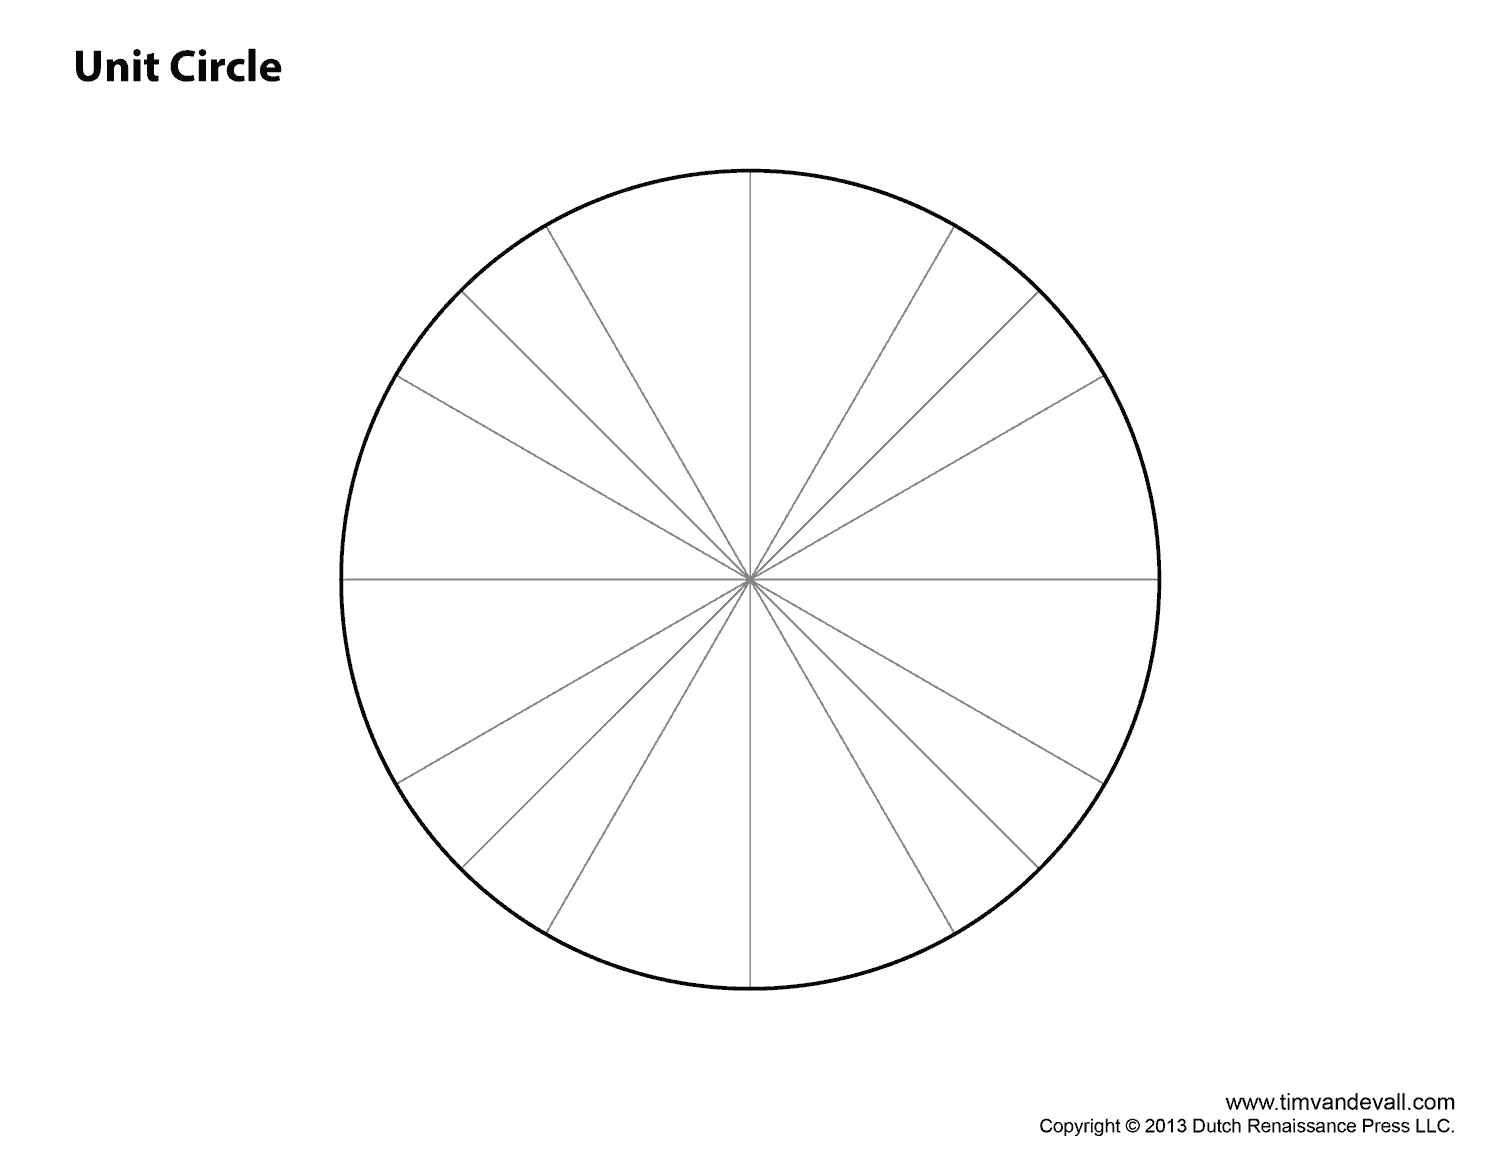 Blank Unit Circle Chart Printable Fill In The Unit Circle Worksheet Tim s Printables Blank Unit Circle Practices Worksheets Writing Circle